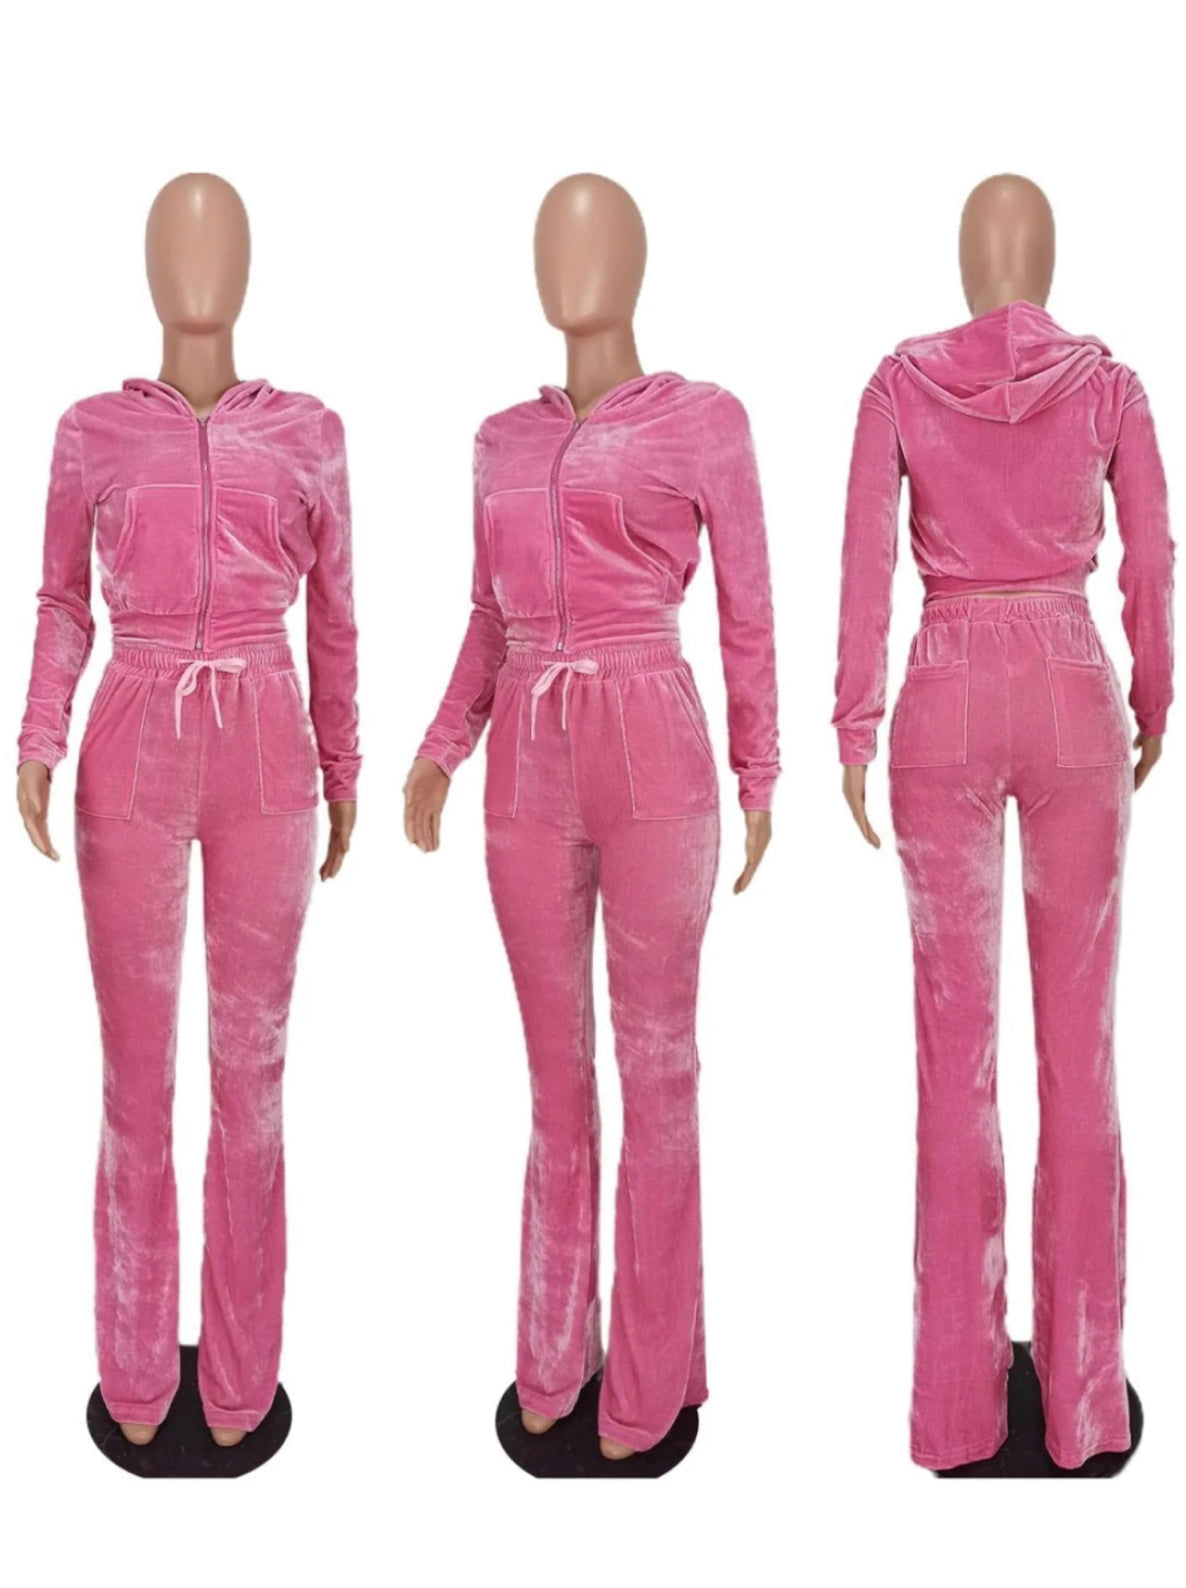 The Glam Set (Pink)